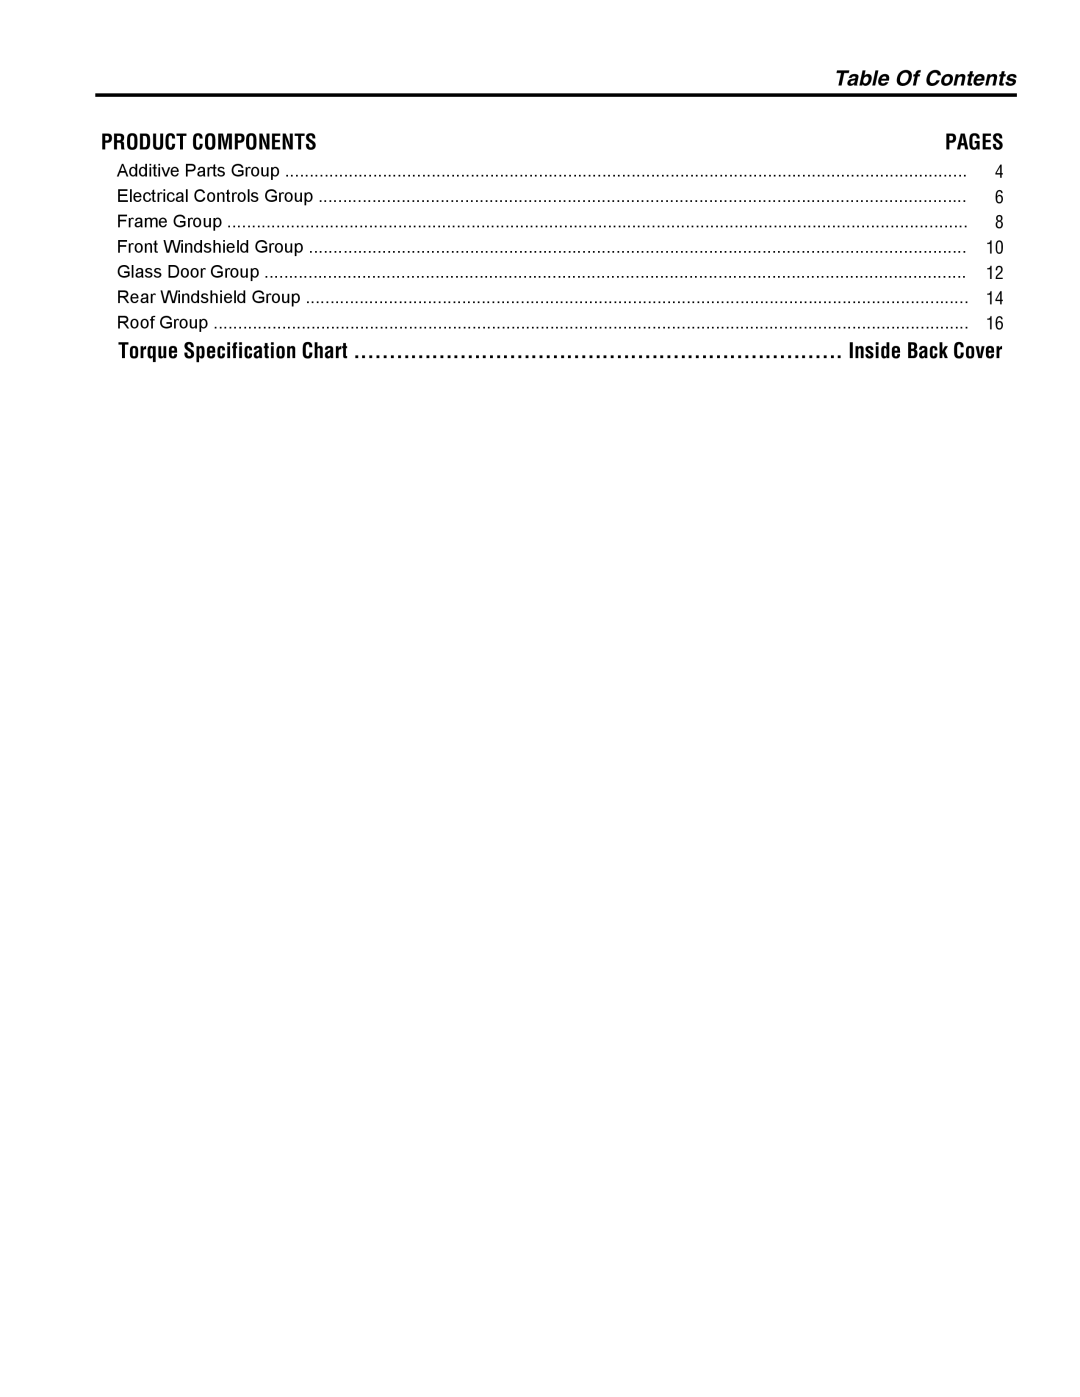 Snapper 1694401 manual Table Of Contents, Product Components, Pages, Torque Specification Chart, Inside Back Cover 